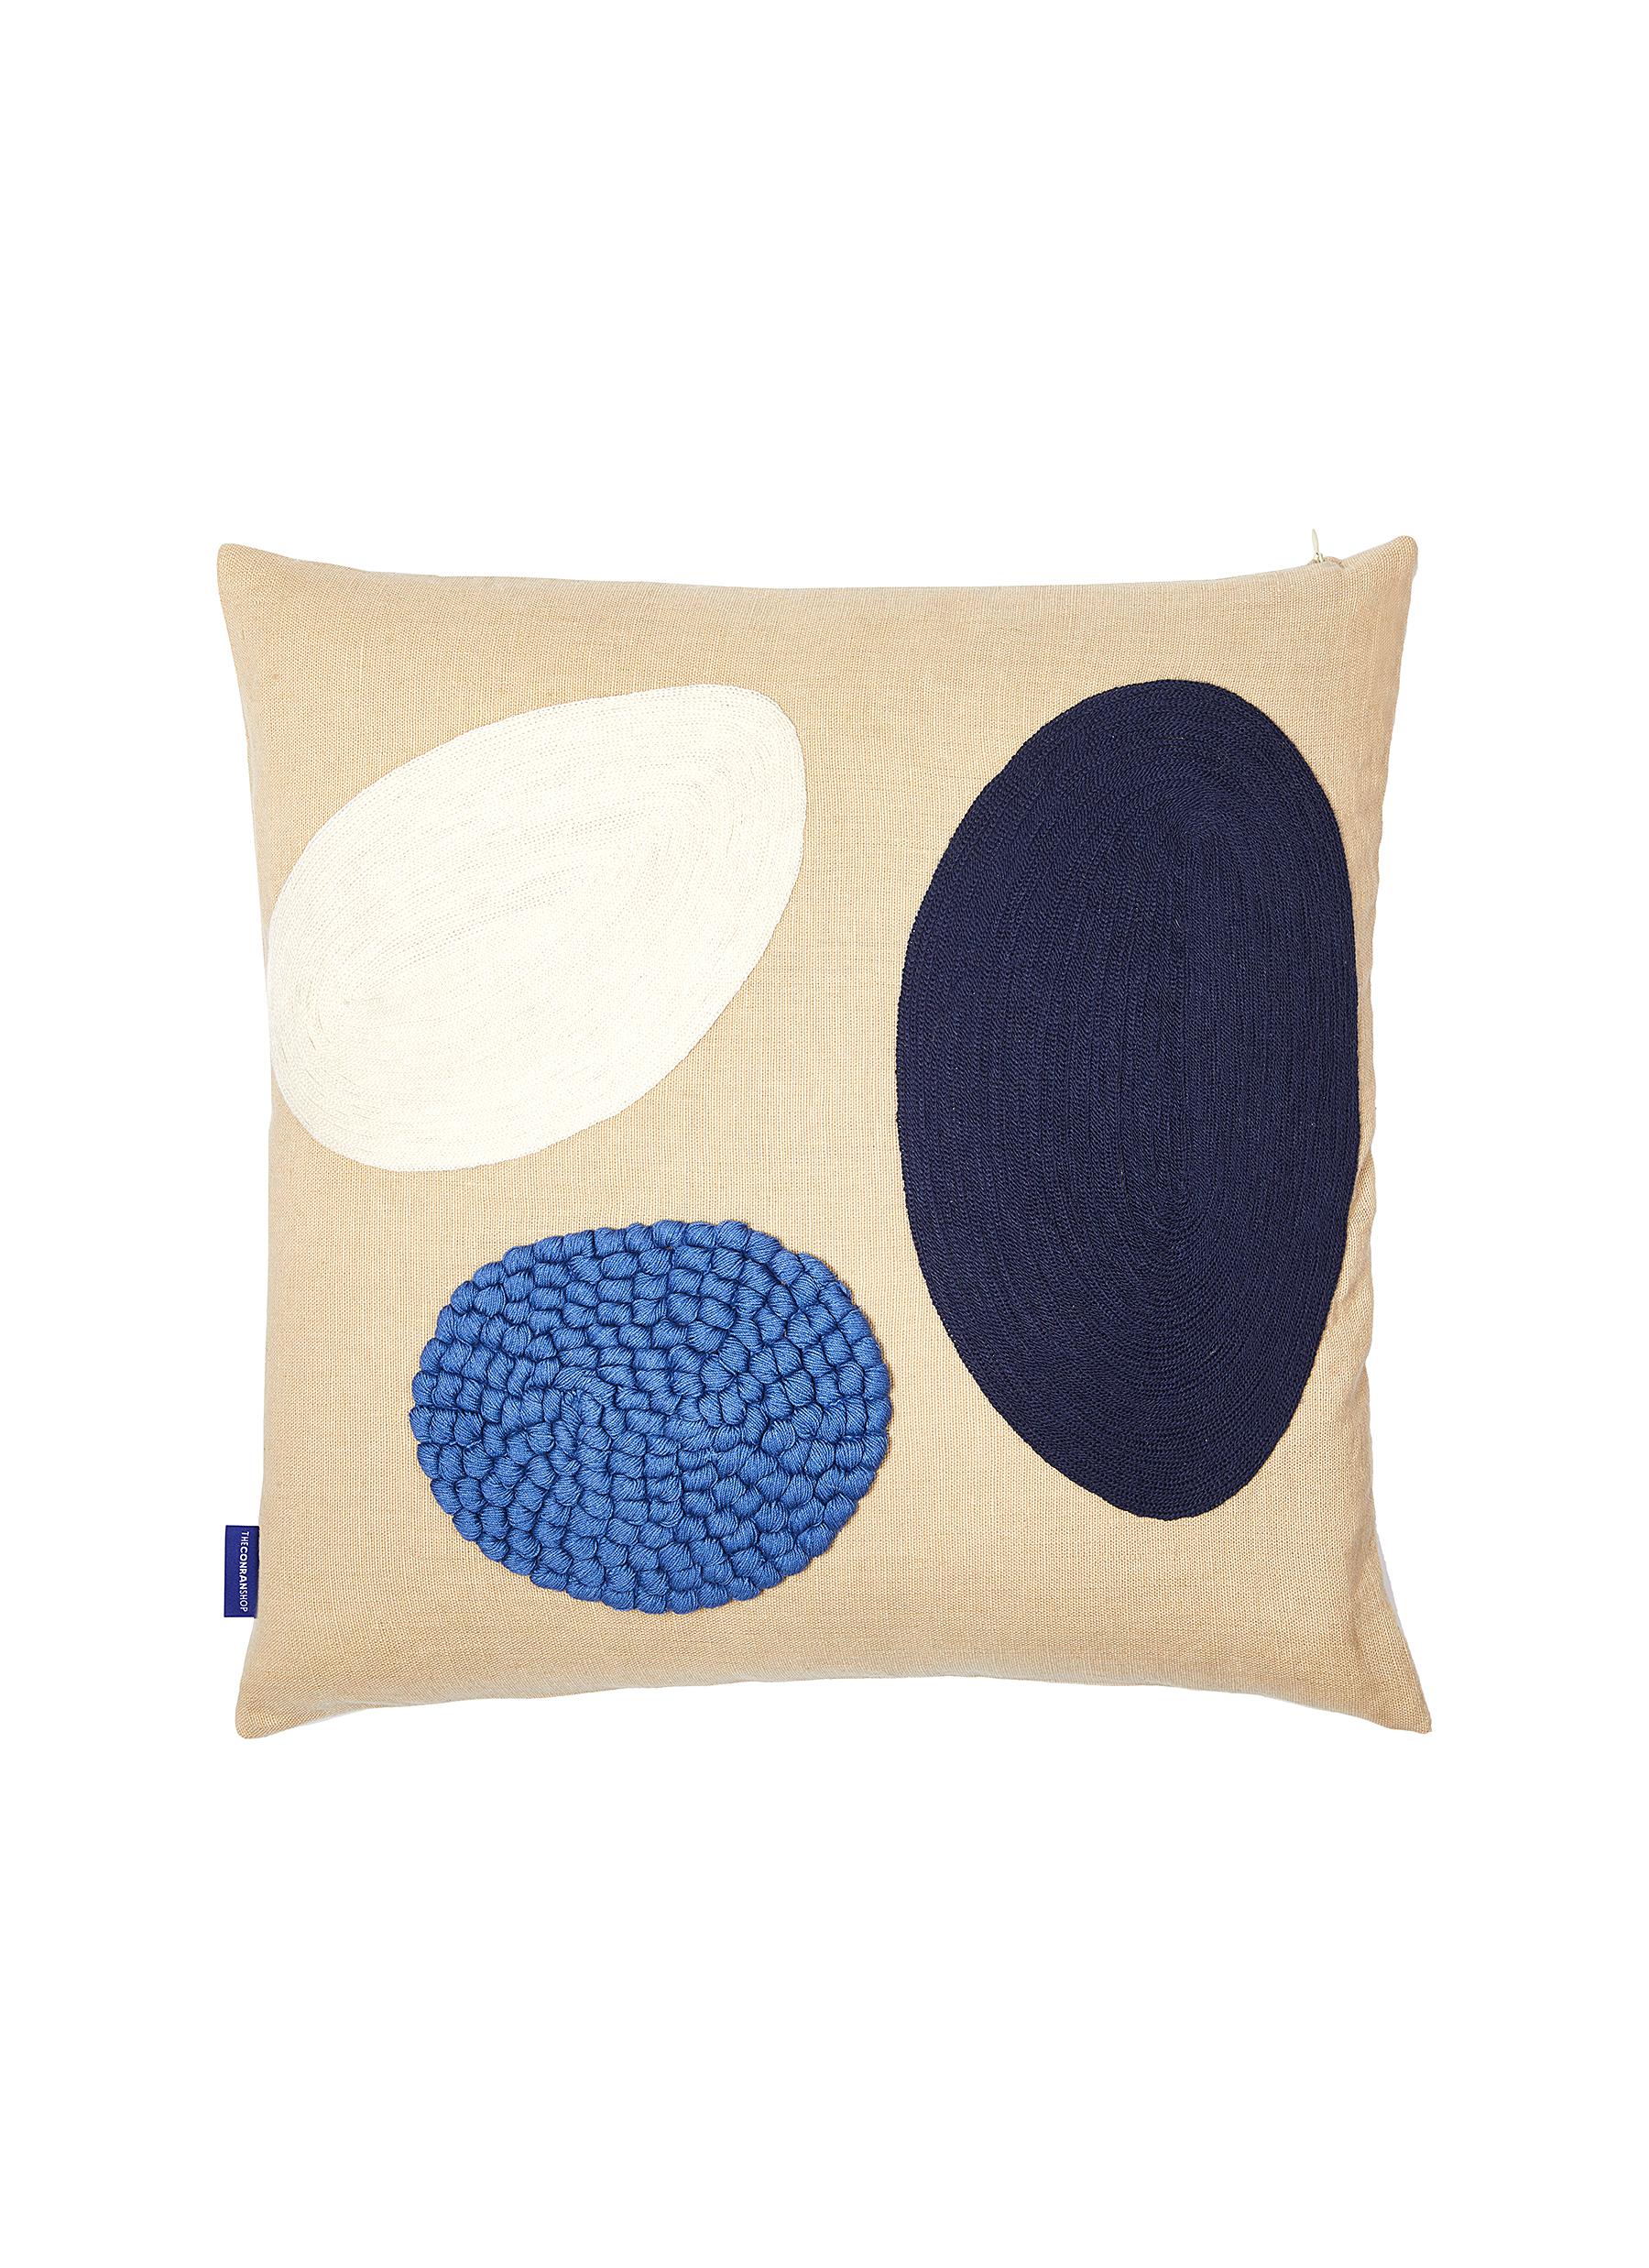 Knotted Pebbles Cushion Cover - Palace Blue/Navy